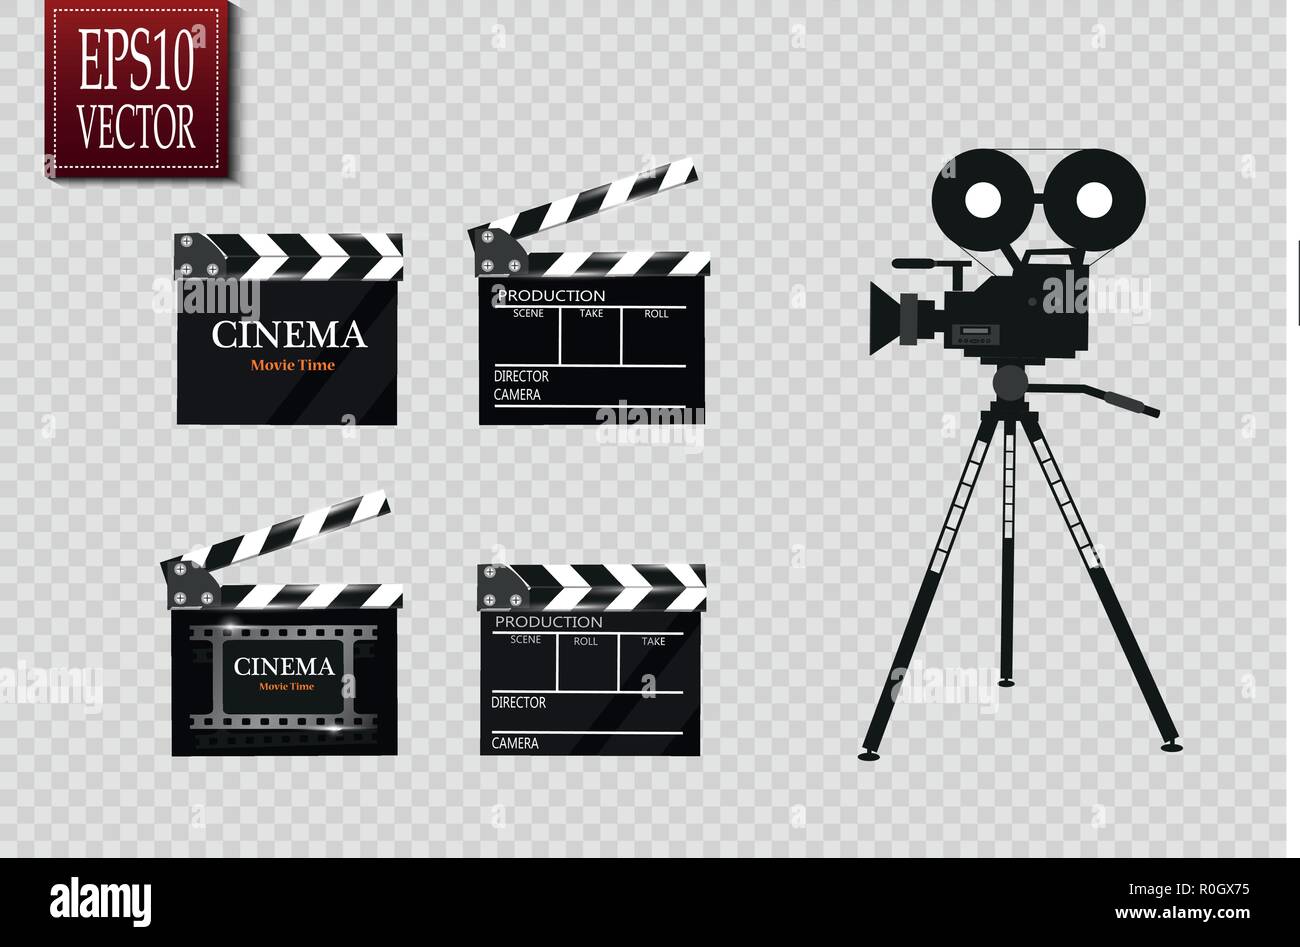 Cinema festival Flyer Or Poster With Movie Reel And Clapper Board. Vector Illustration Of Film Industry. Template For Your Design Stock Vector